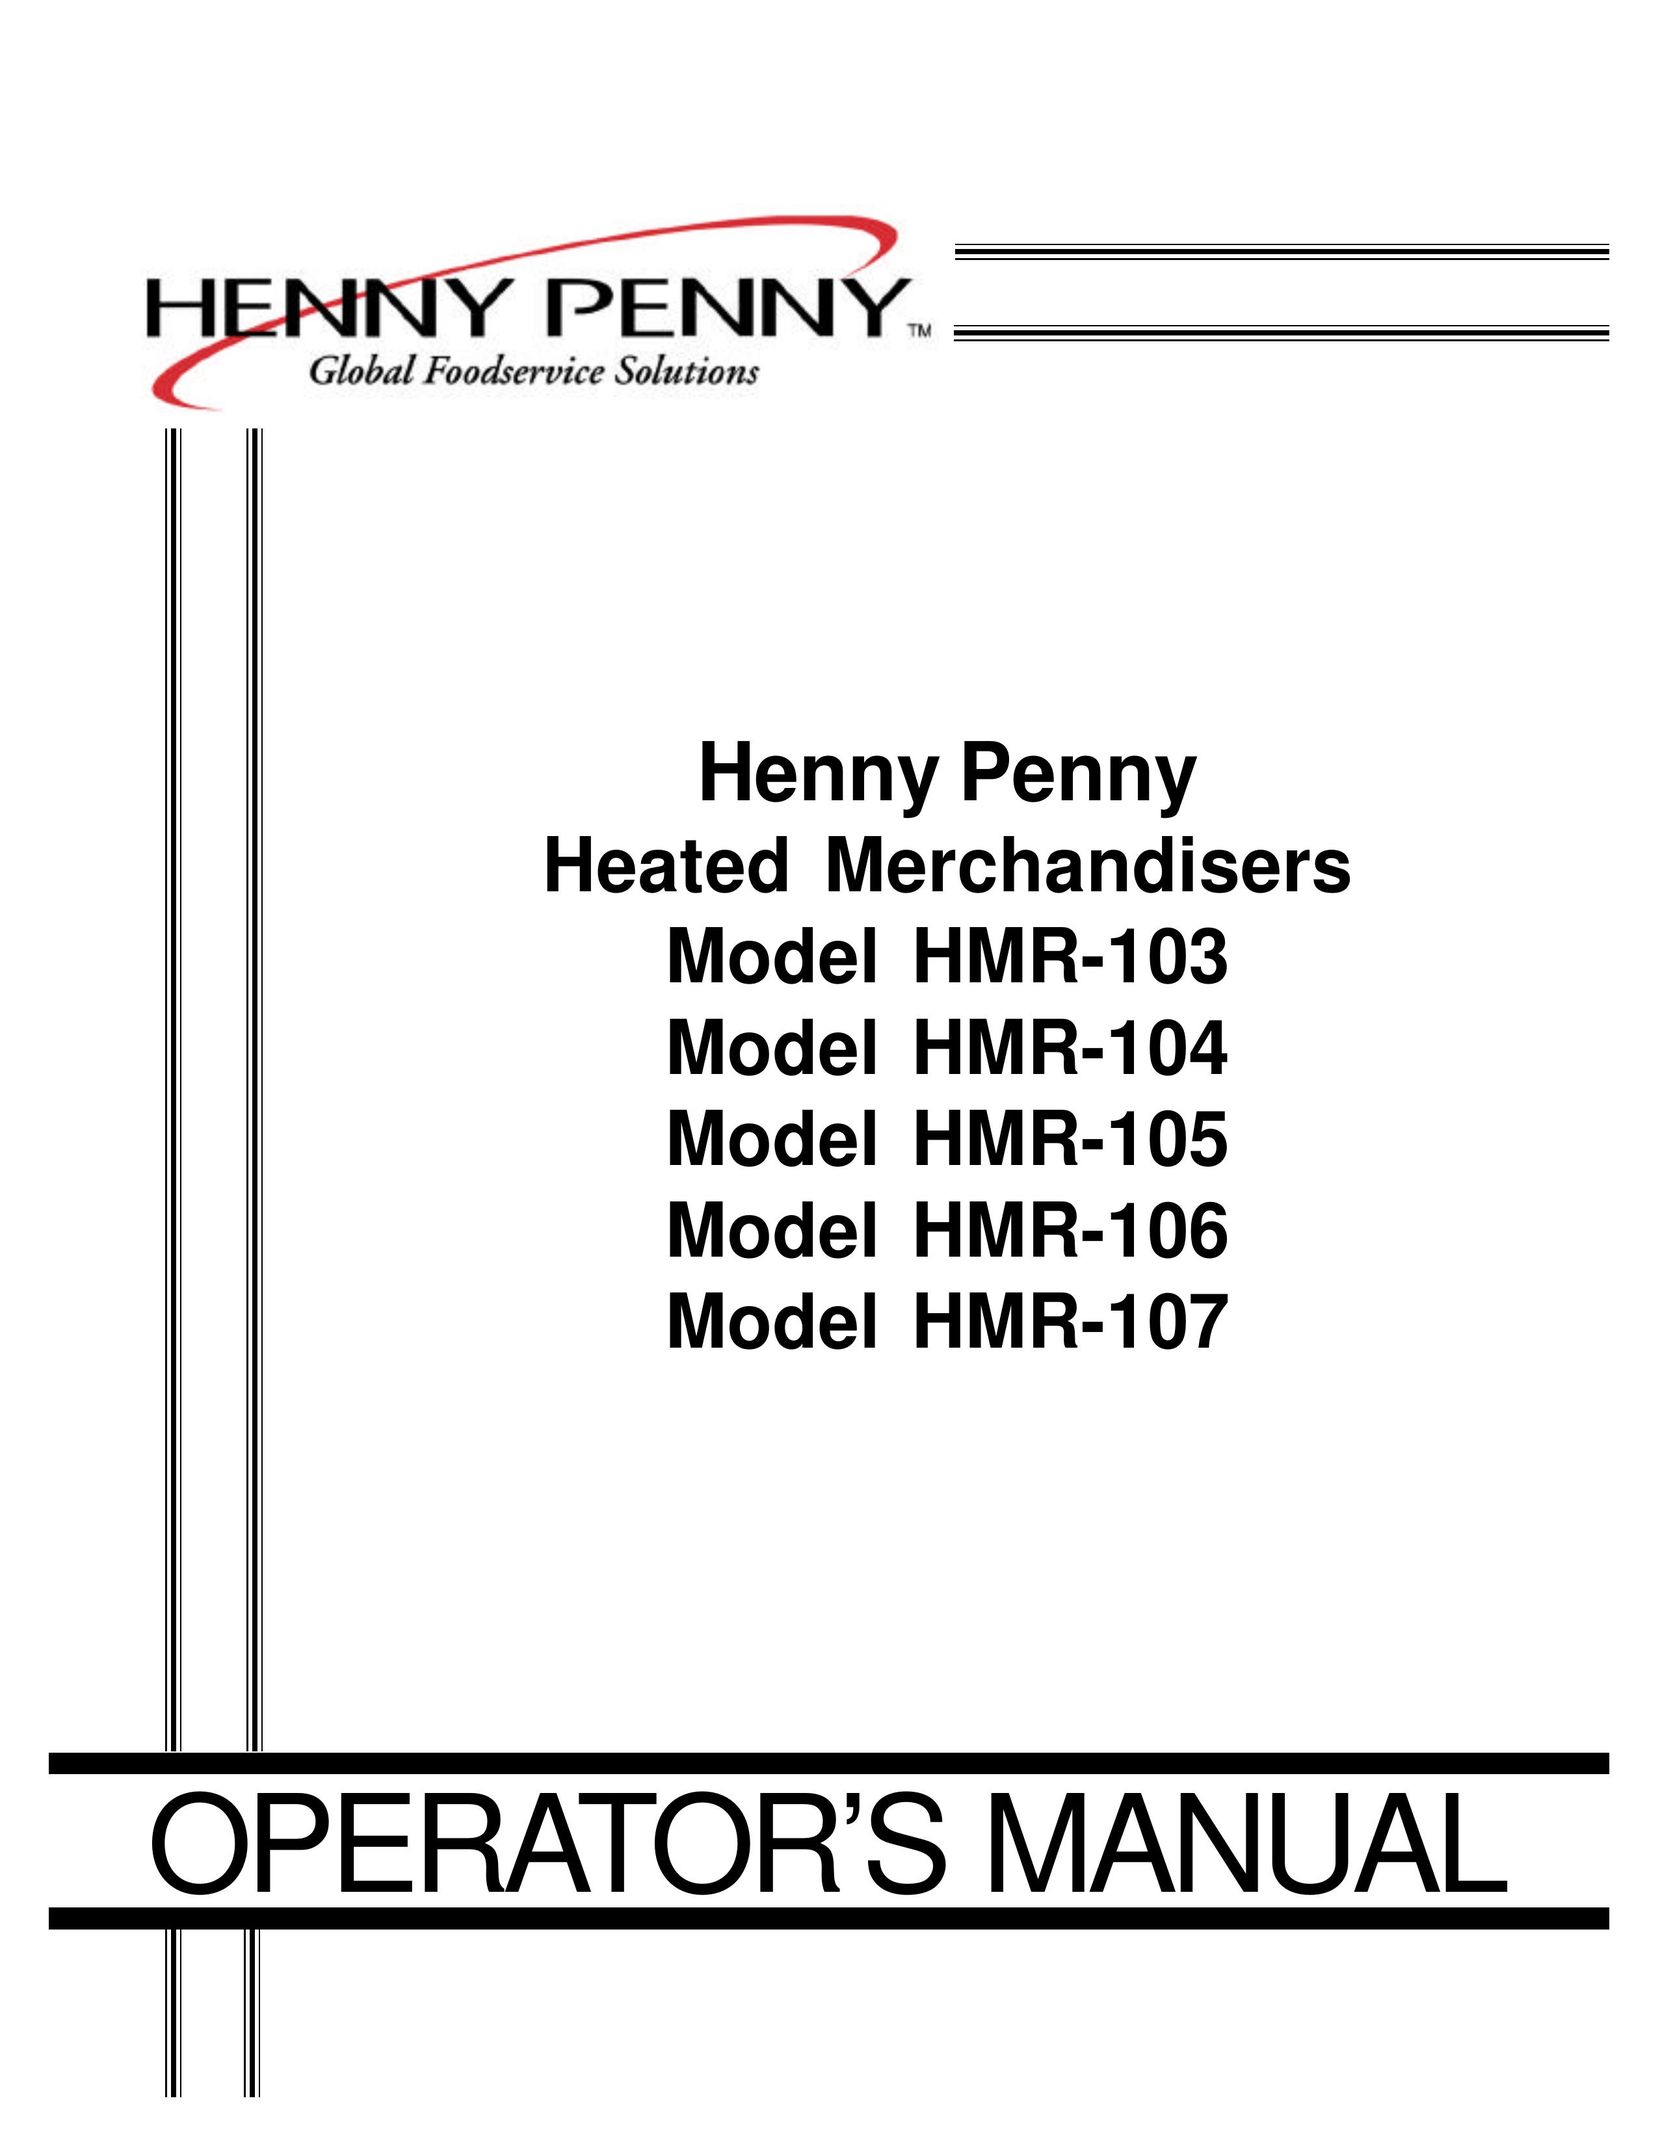 Henny Penny HMR-107 Electric Heater User Manual